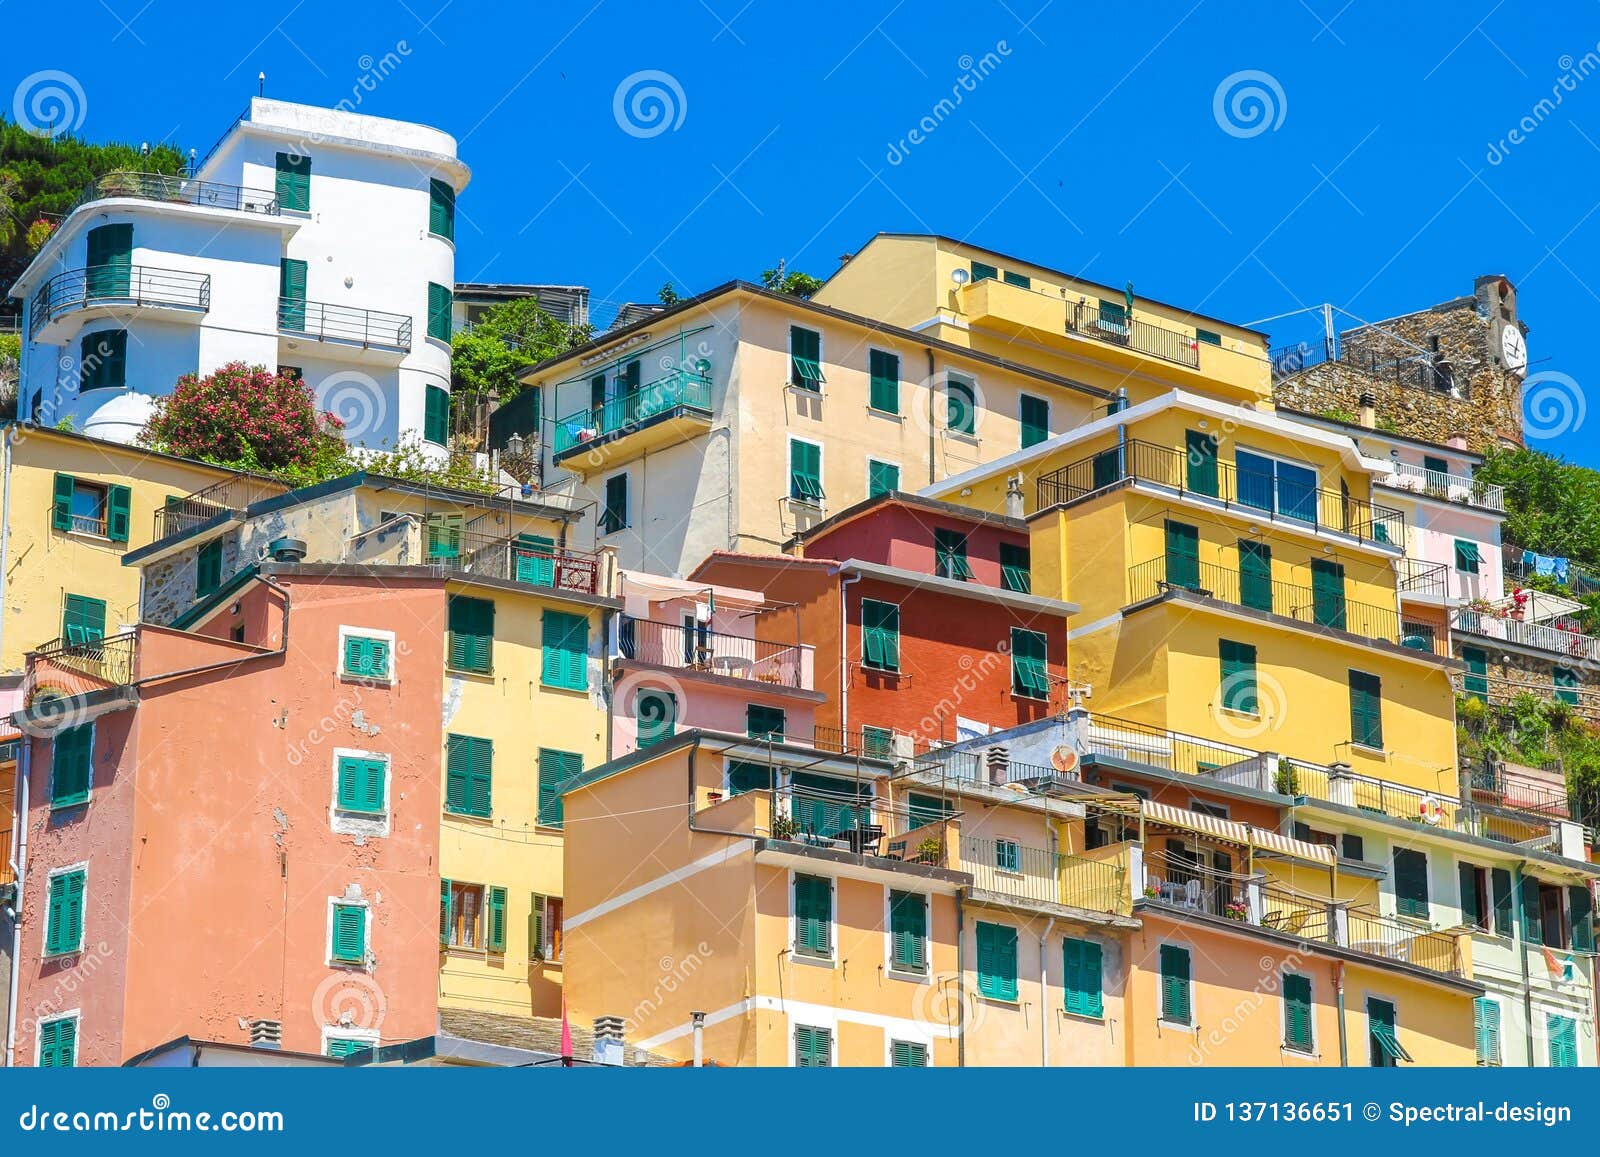 View Over the Colourful Houses of Cinque Terre Stock Image - Image of ...